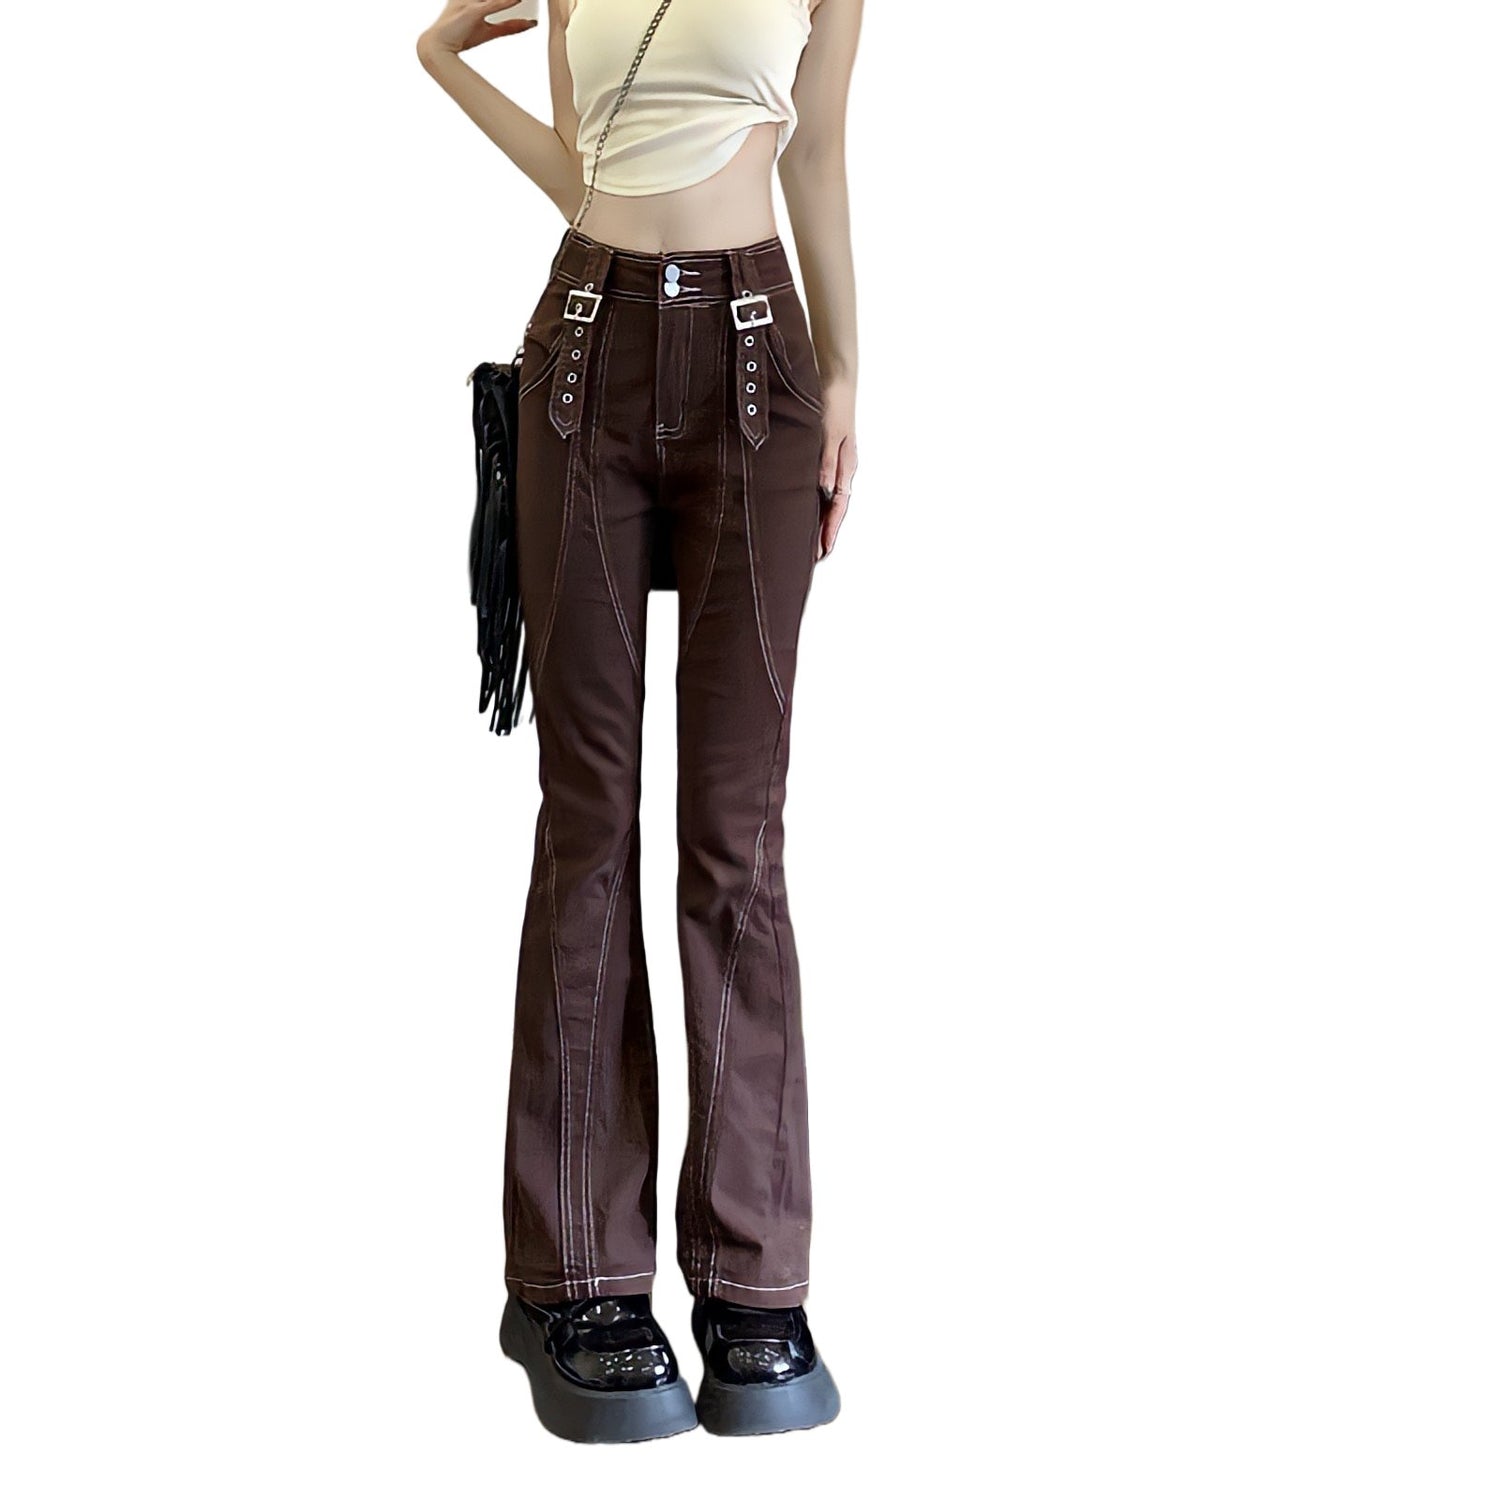 Retro Flared Brown Jeans - Jeans